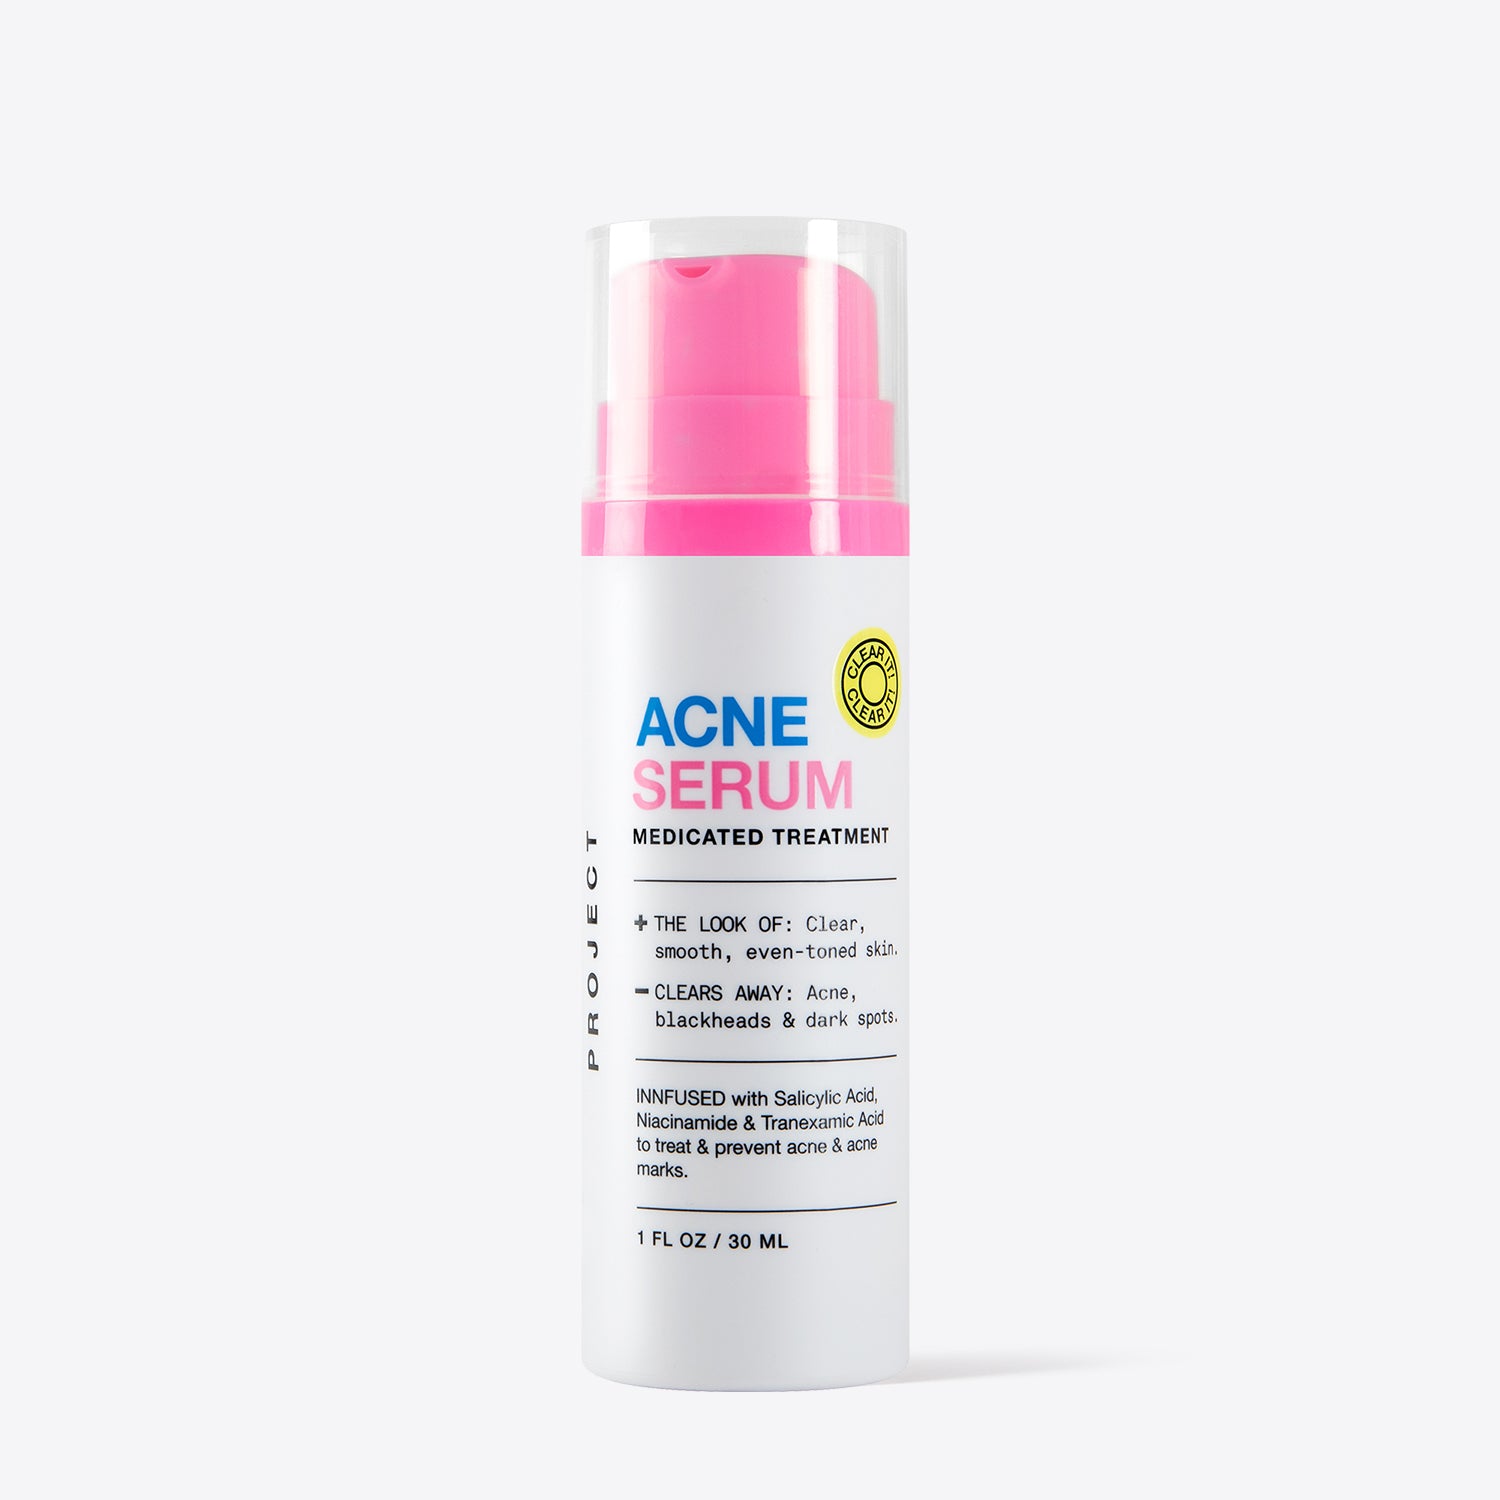 When to Use Acne Serum